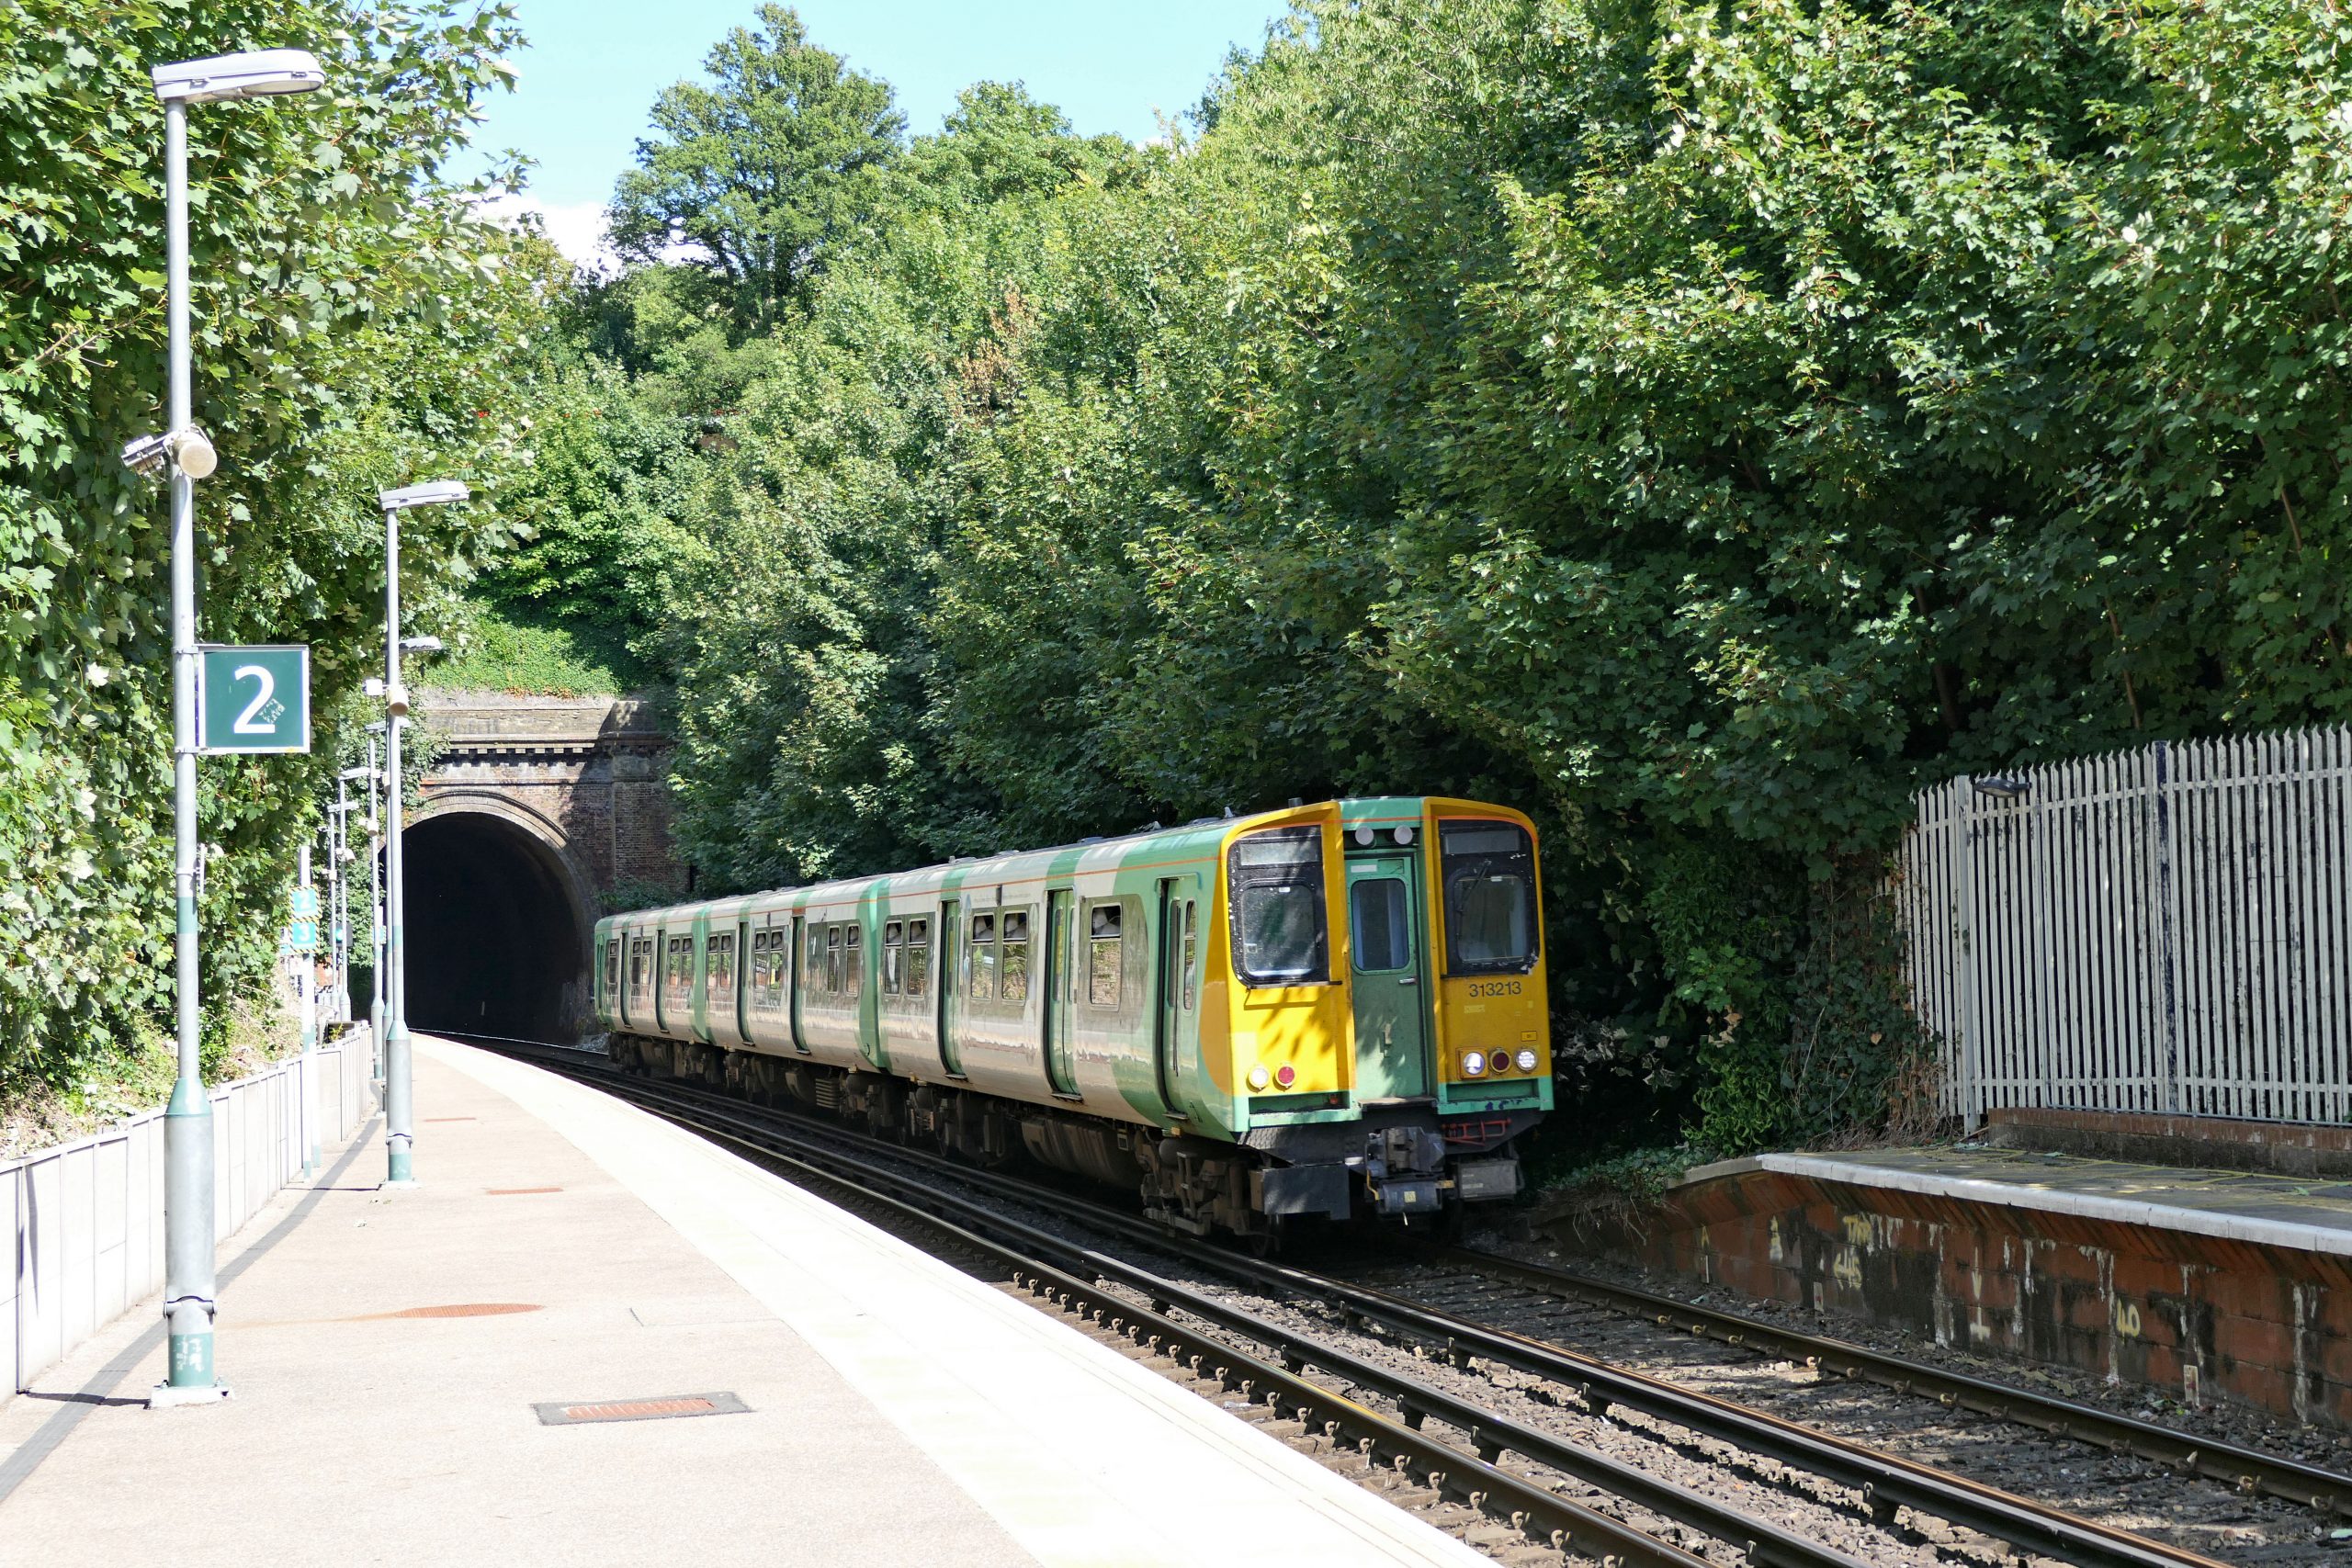 313 213 approaching London Road Brighton with the 14:25 Seaford to Brighton service. 05 August 2022.